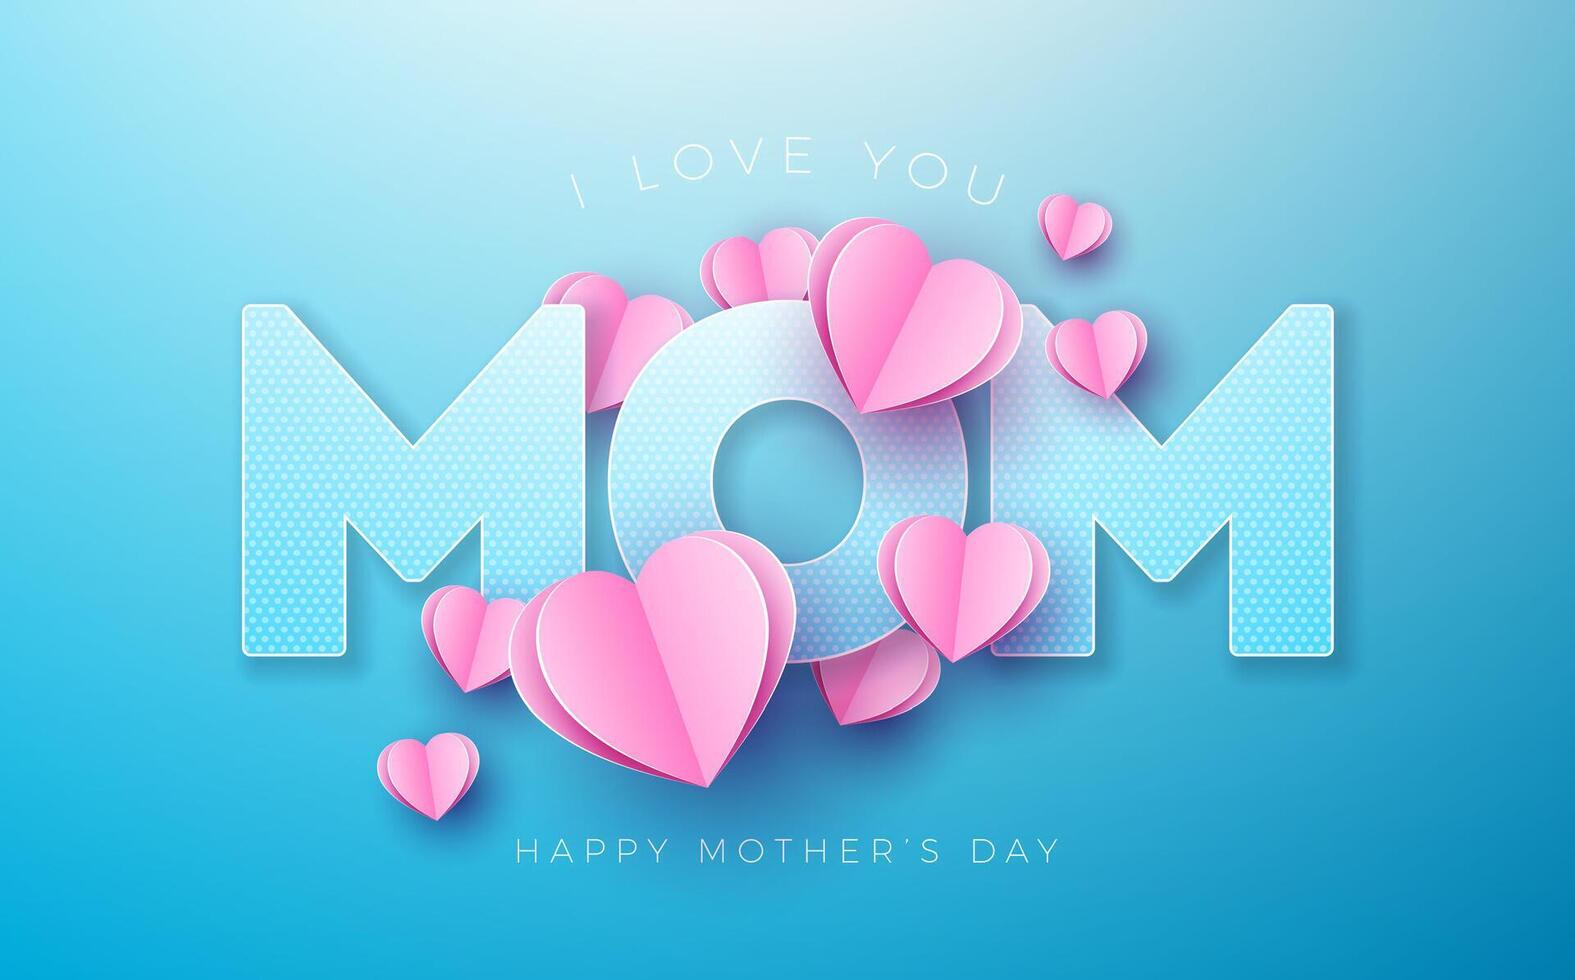 Happy Mother's Day Postcard with Paper Hearts and I Love You Typography Lettering on Pink Background. Vector Best Mom Celebration Design with Symbol of Love for Greeting Card, Banner, Flyer